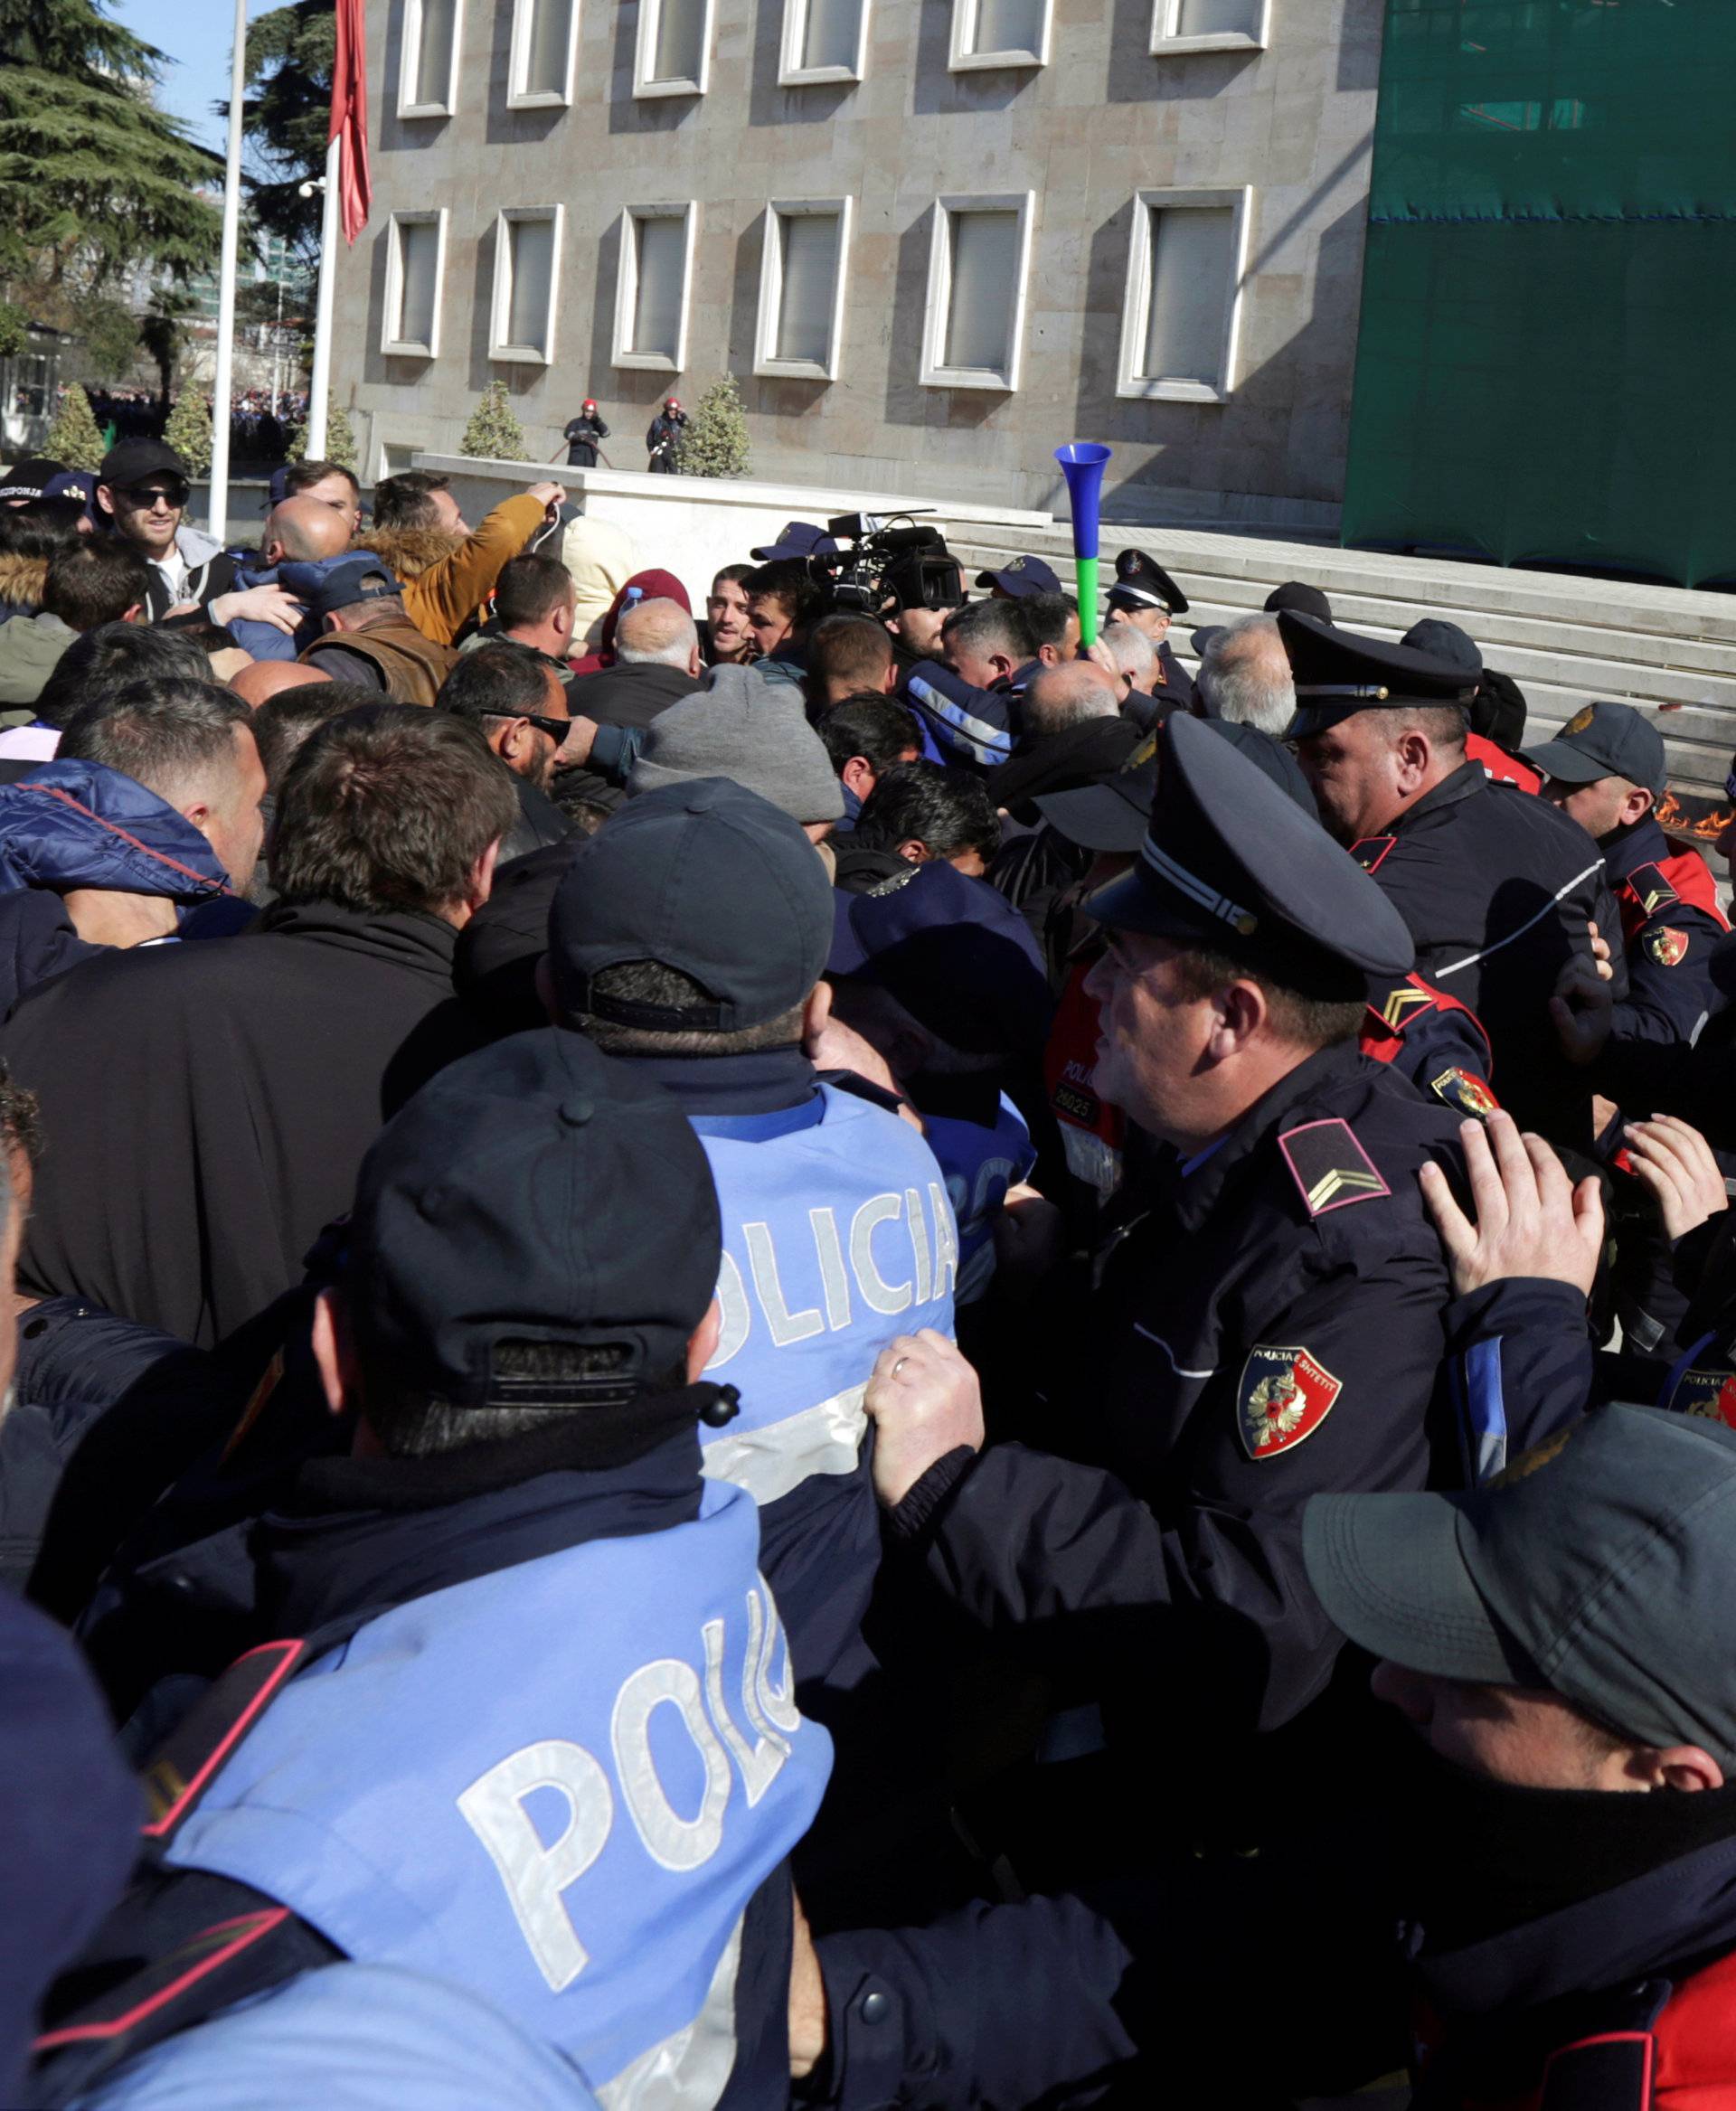 Police surrounds supporters of the opposition party protesting in front of a government building that houses the office of Prime Minister Edi Rama in Tirana